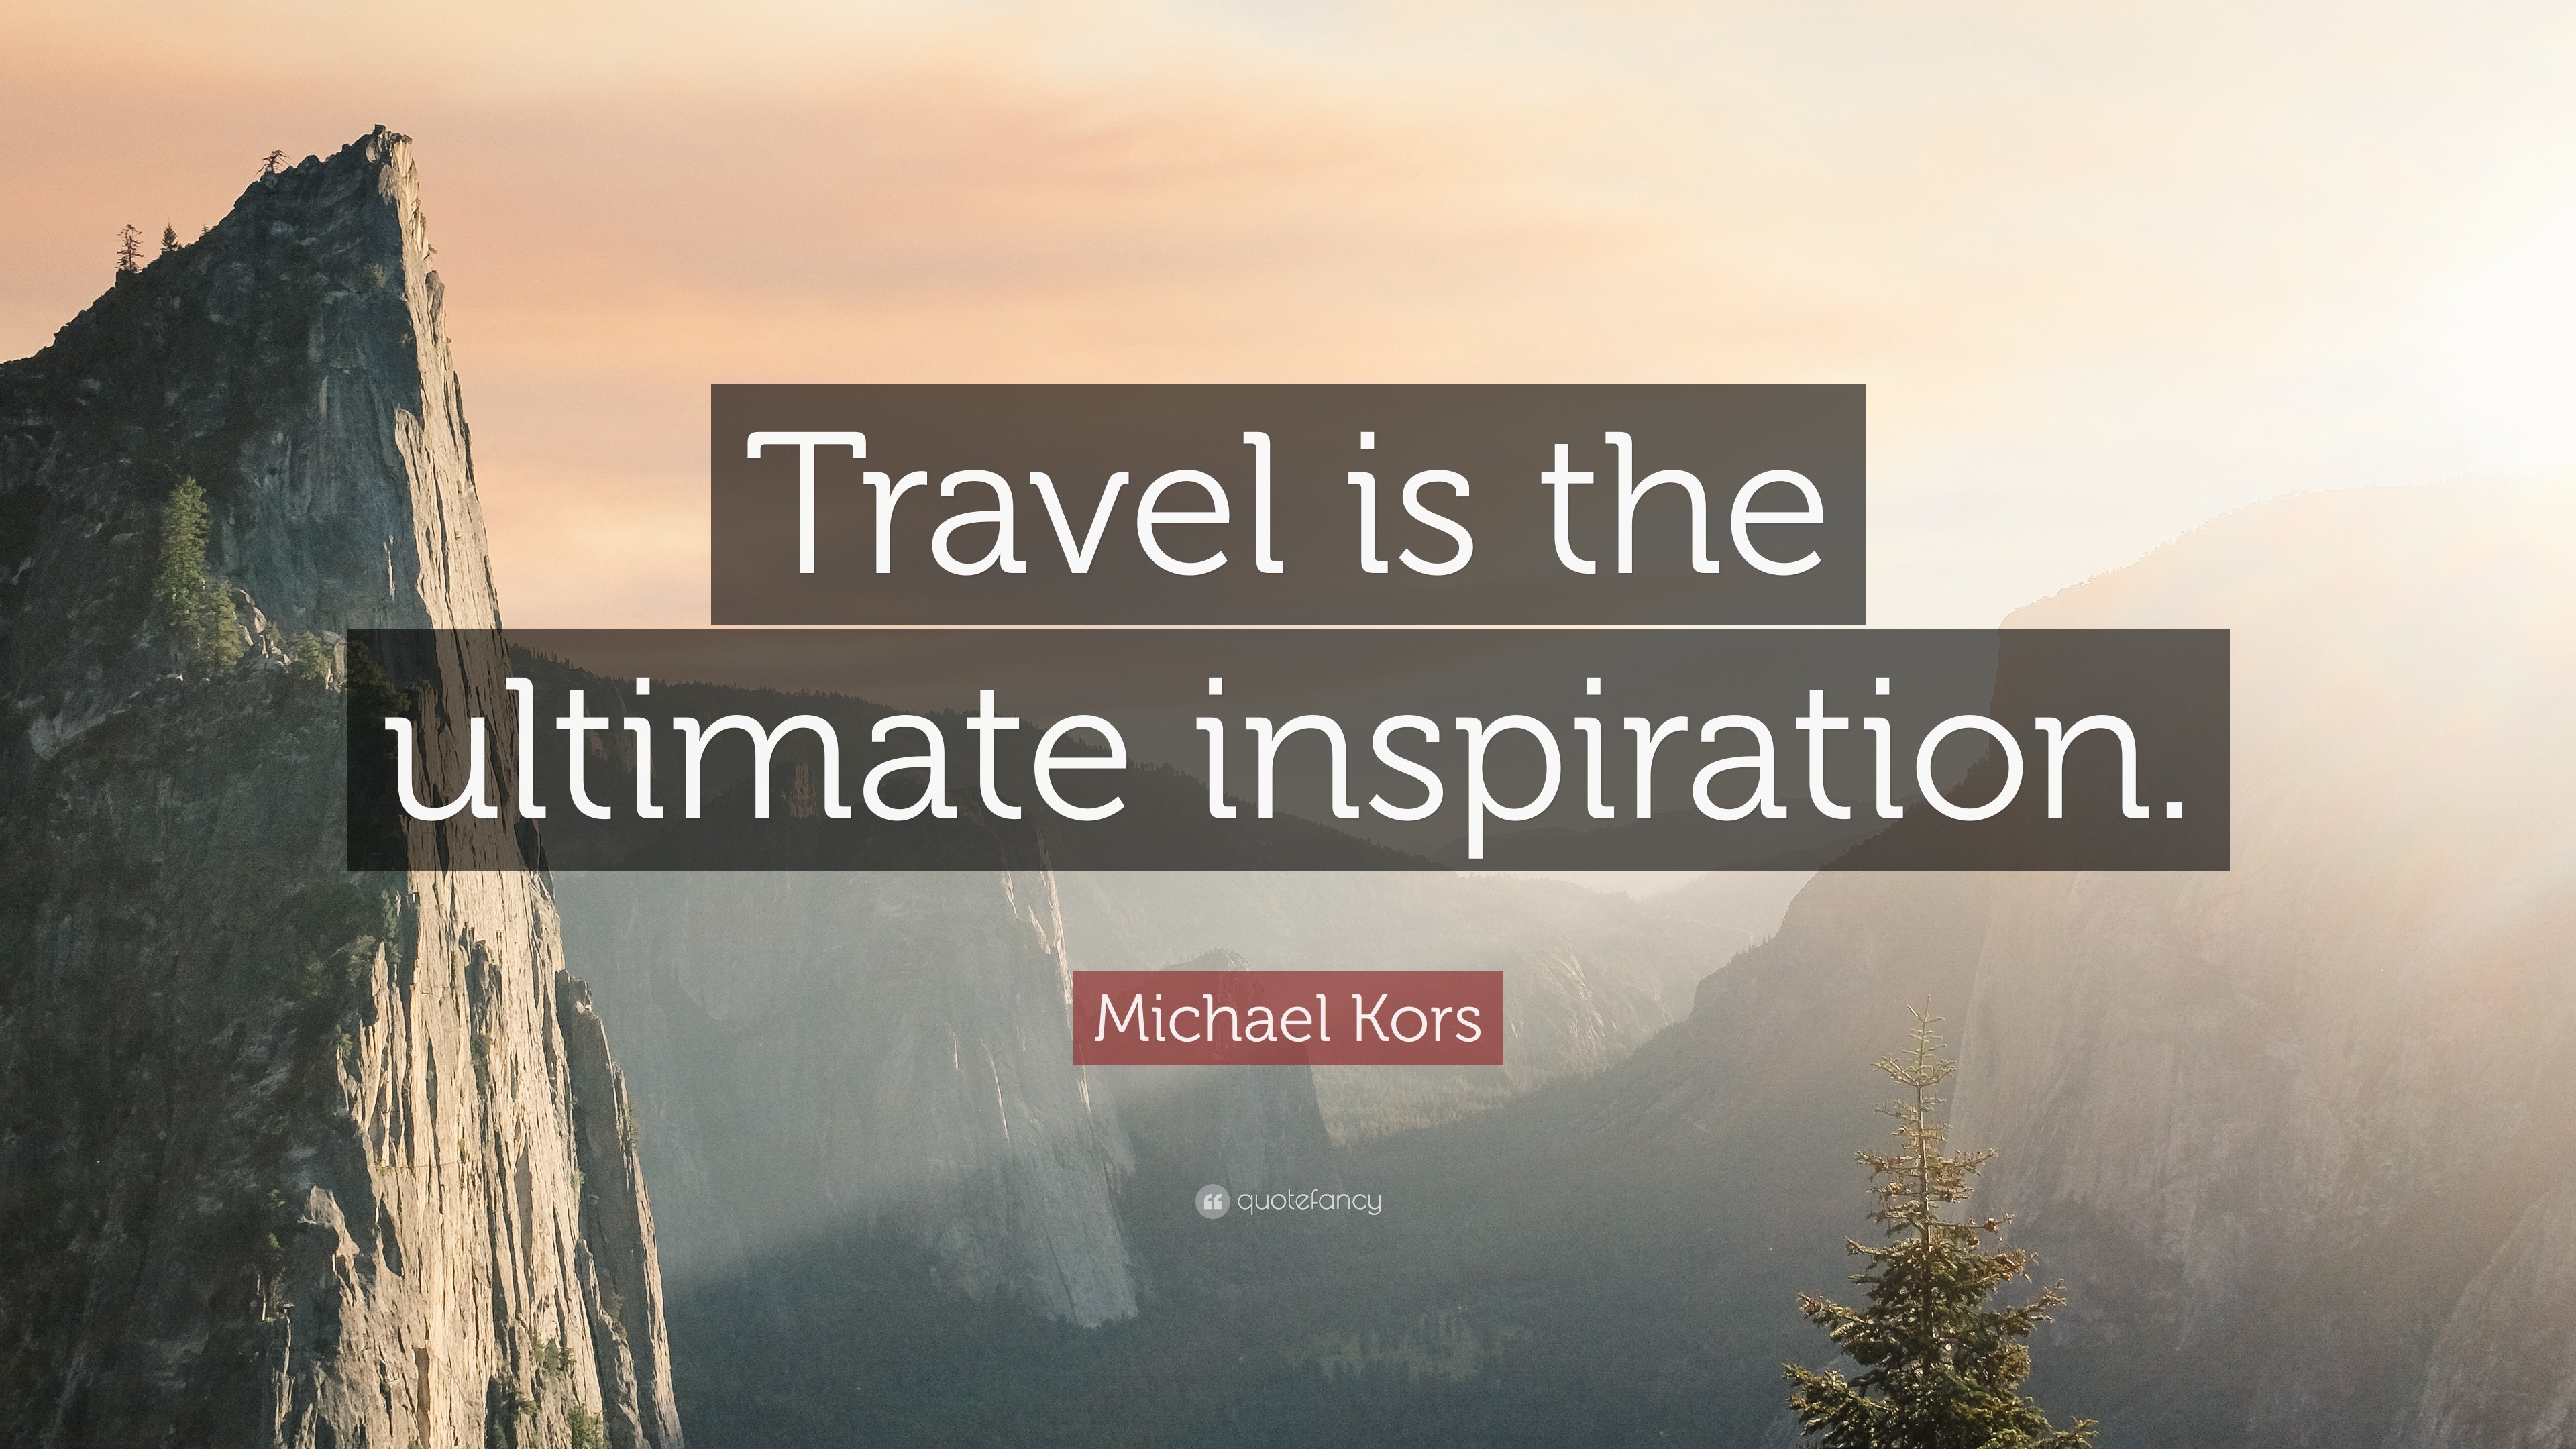 Michael Kors Quote: “Travel is the 